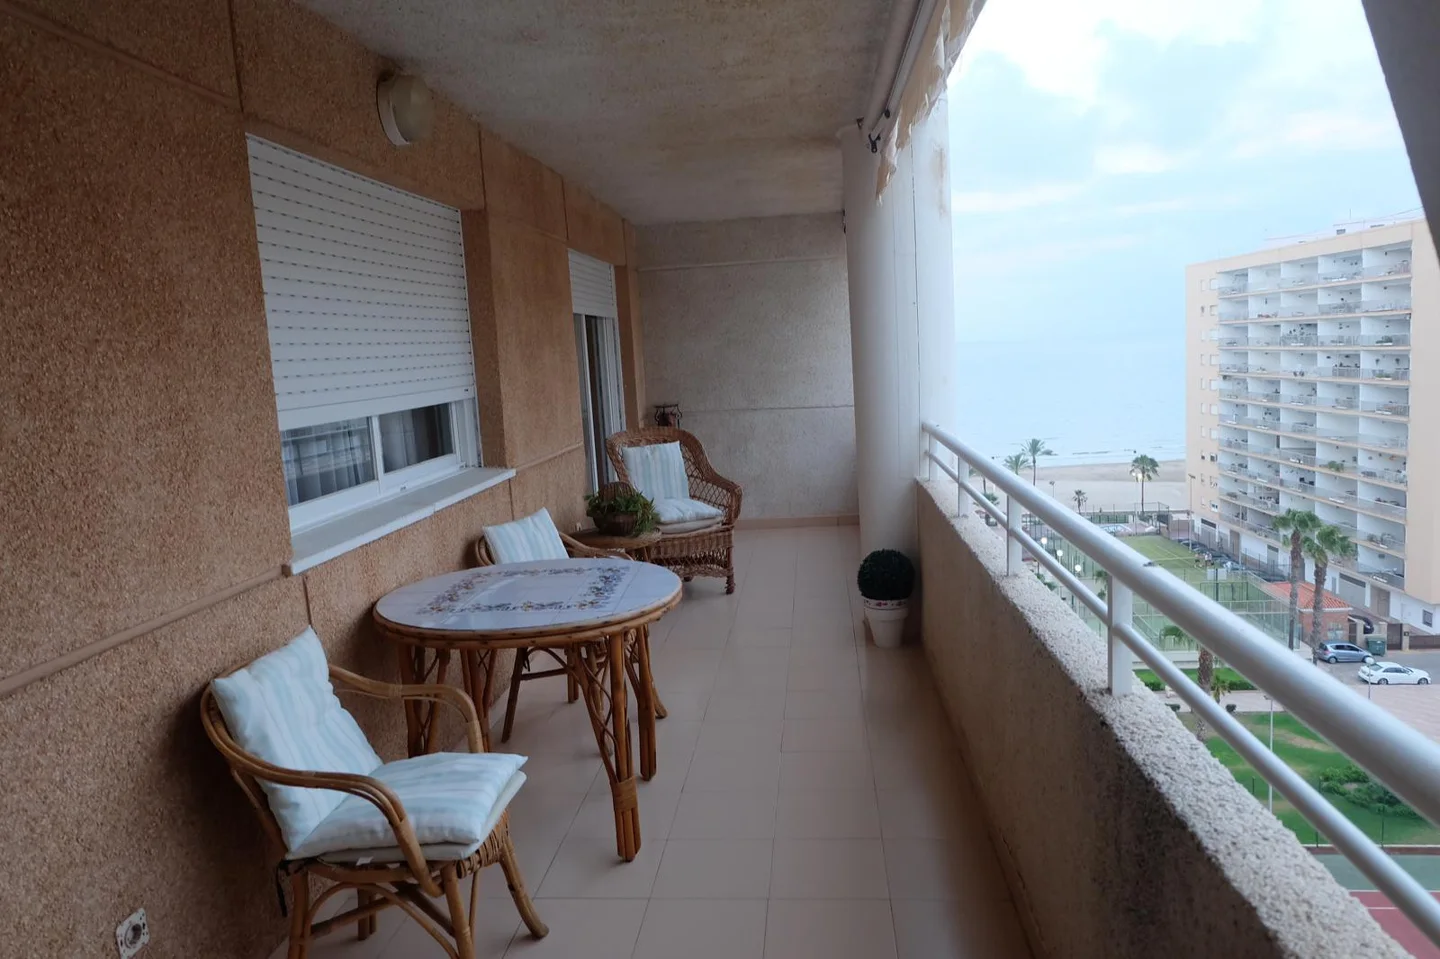 Fantastic Flat in Cullera with incredible views